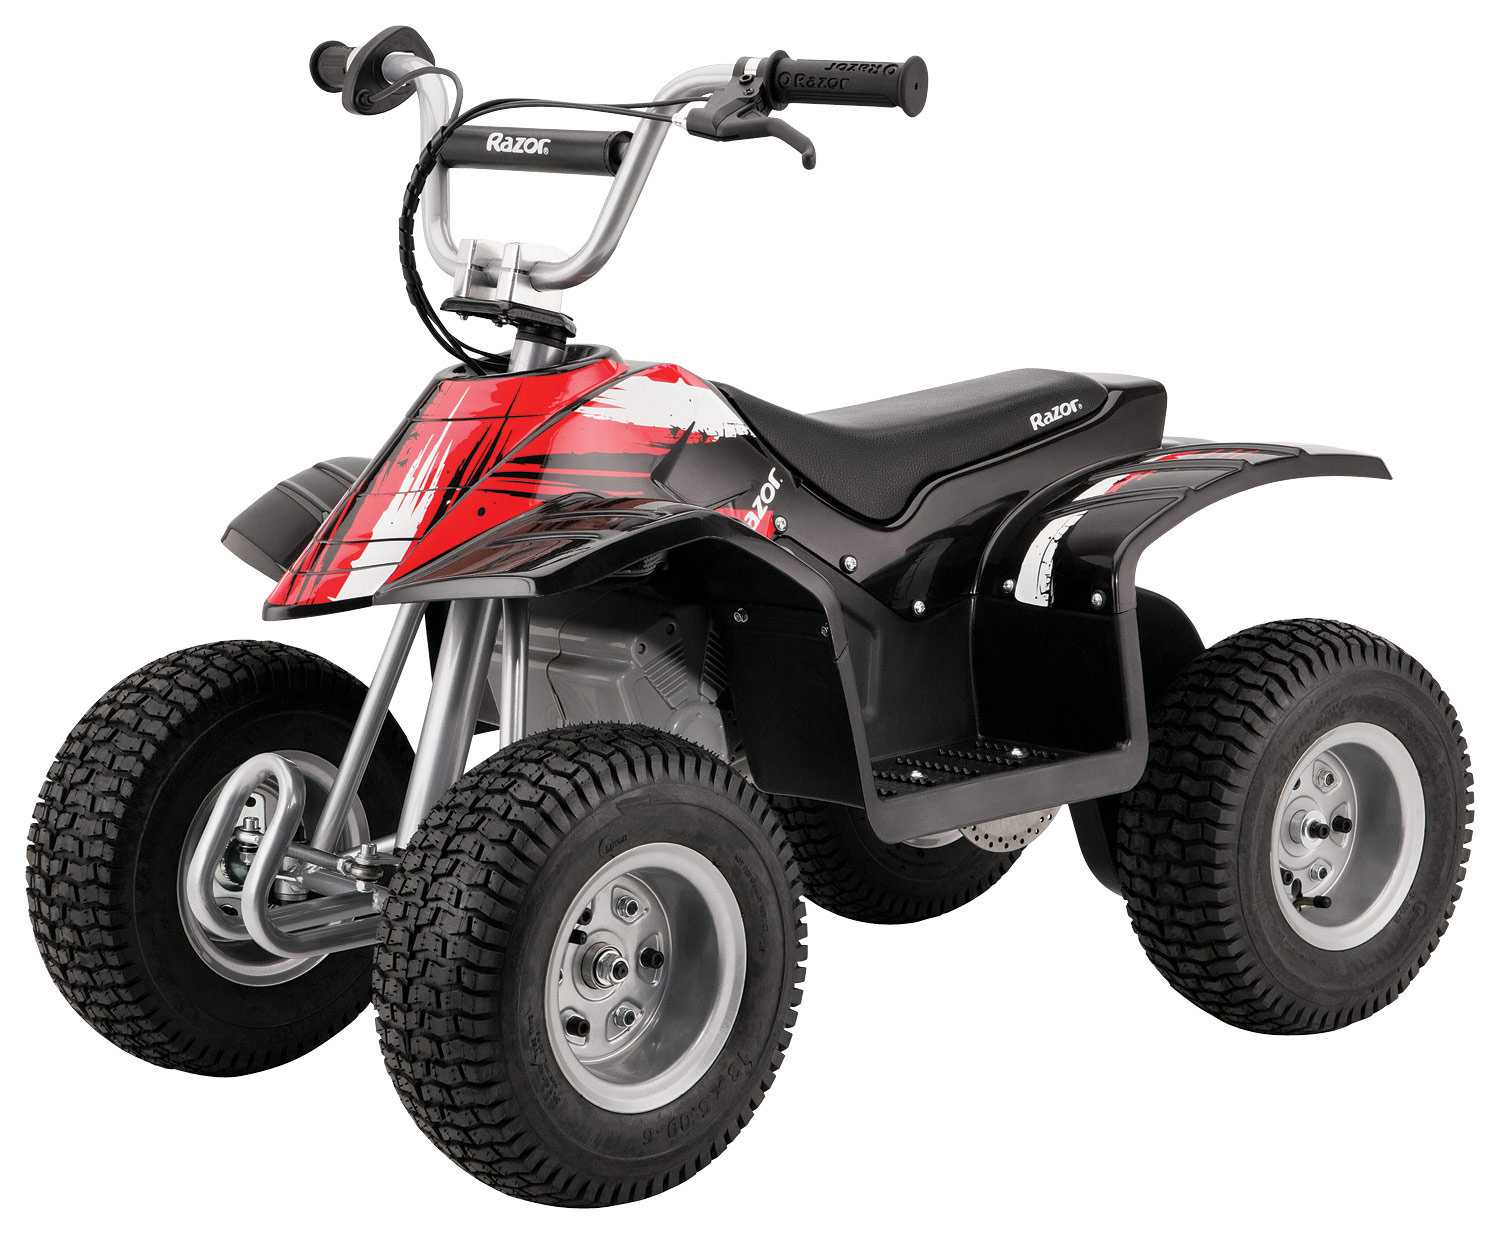 Photo 1 of  Razor Dirt Quad - 24V Electric 4-Wheeler ATV - Twist-Grip Variable-Speed Acceleration Control, Hand-Operated Disc Brake, 12" Knobby Air-Filled Tires